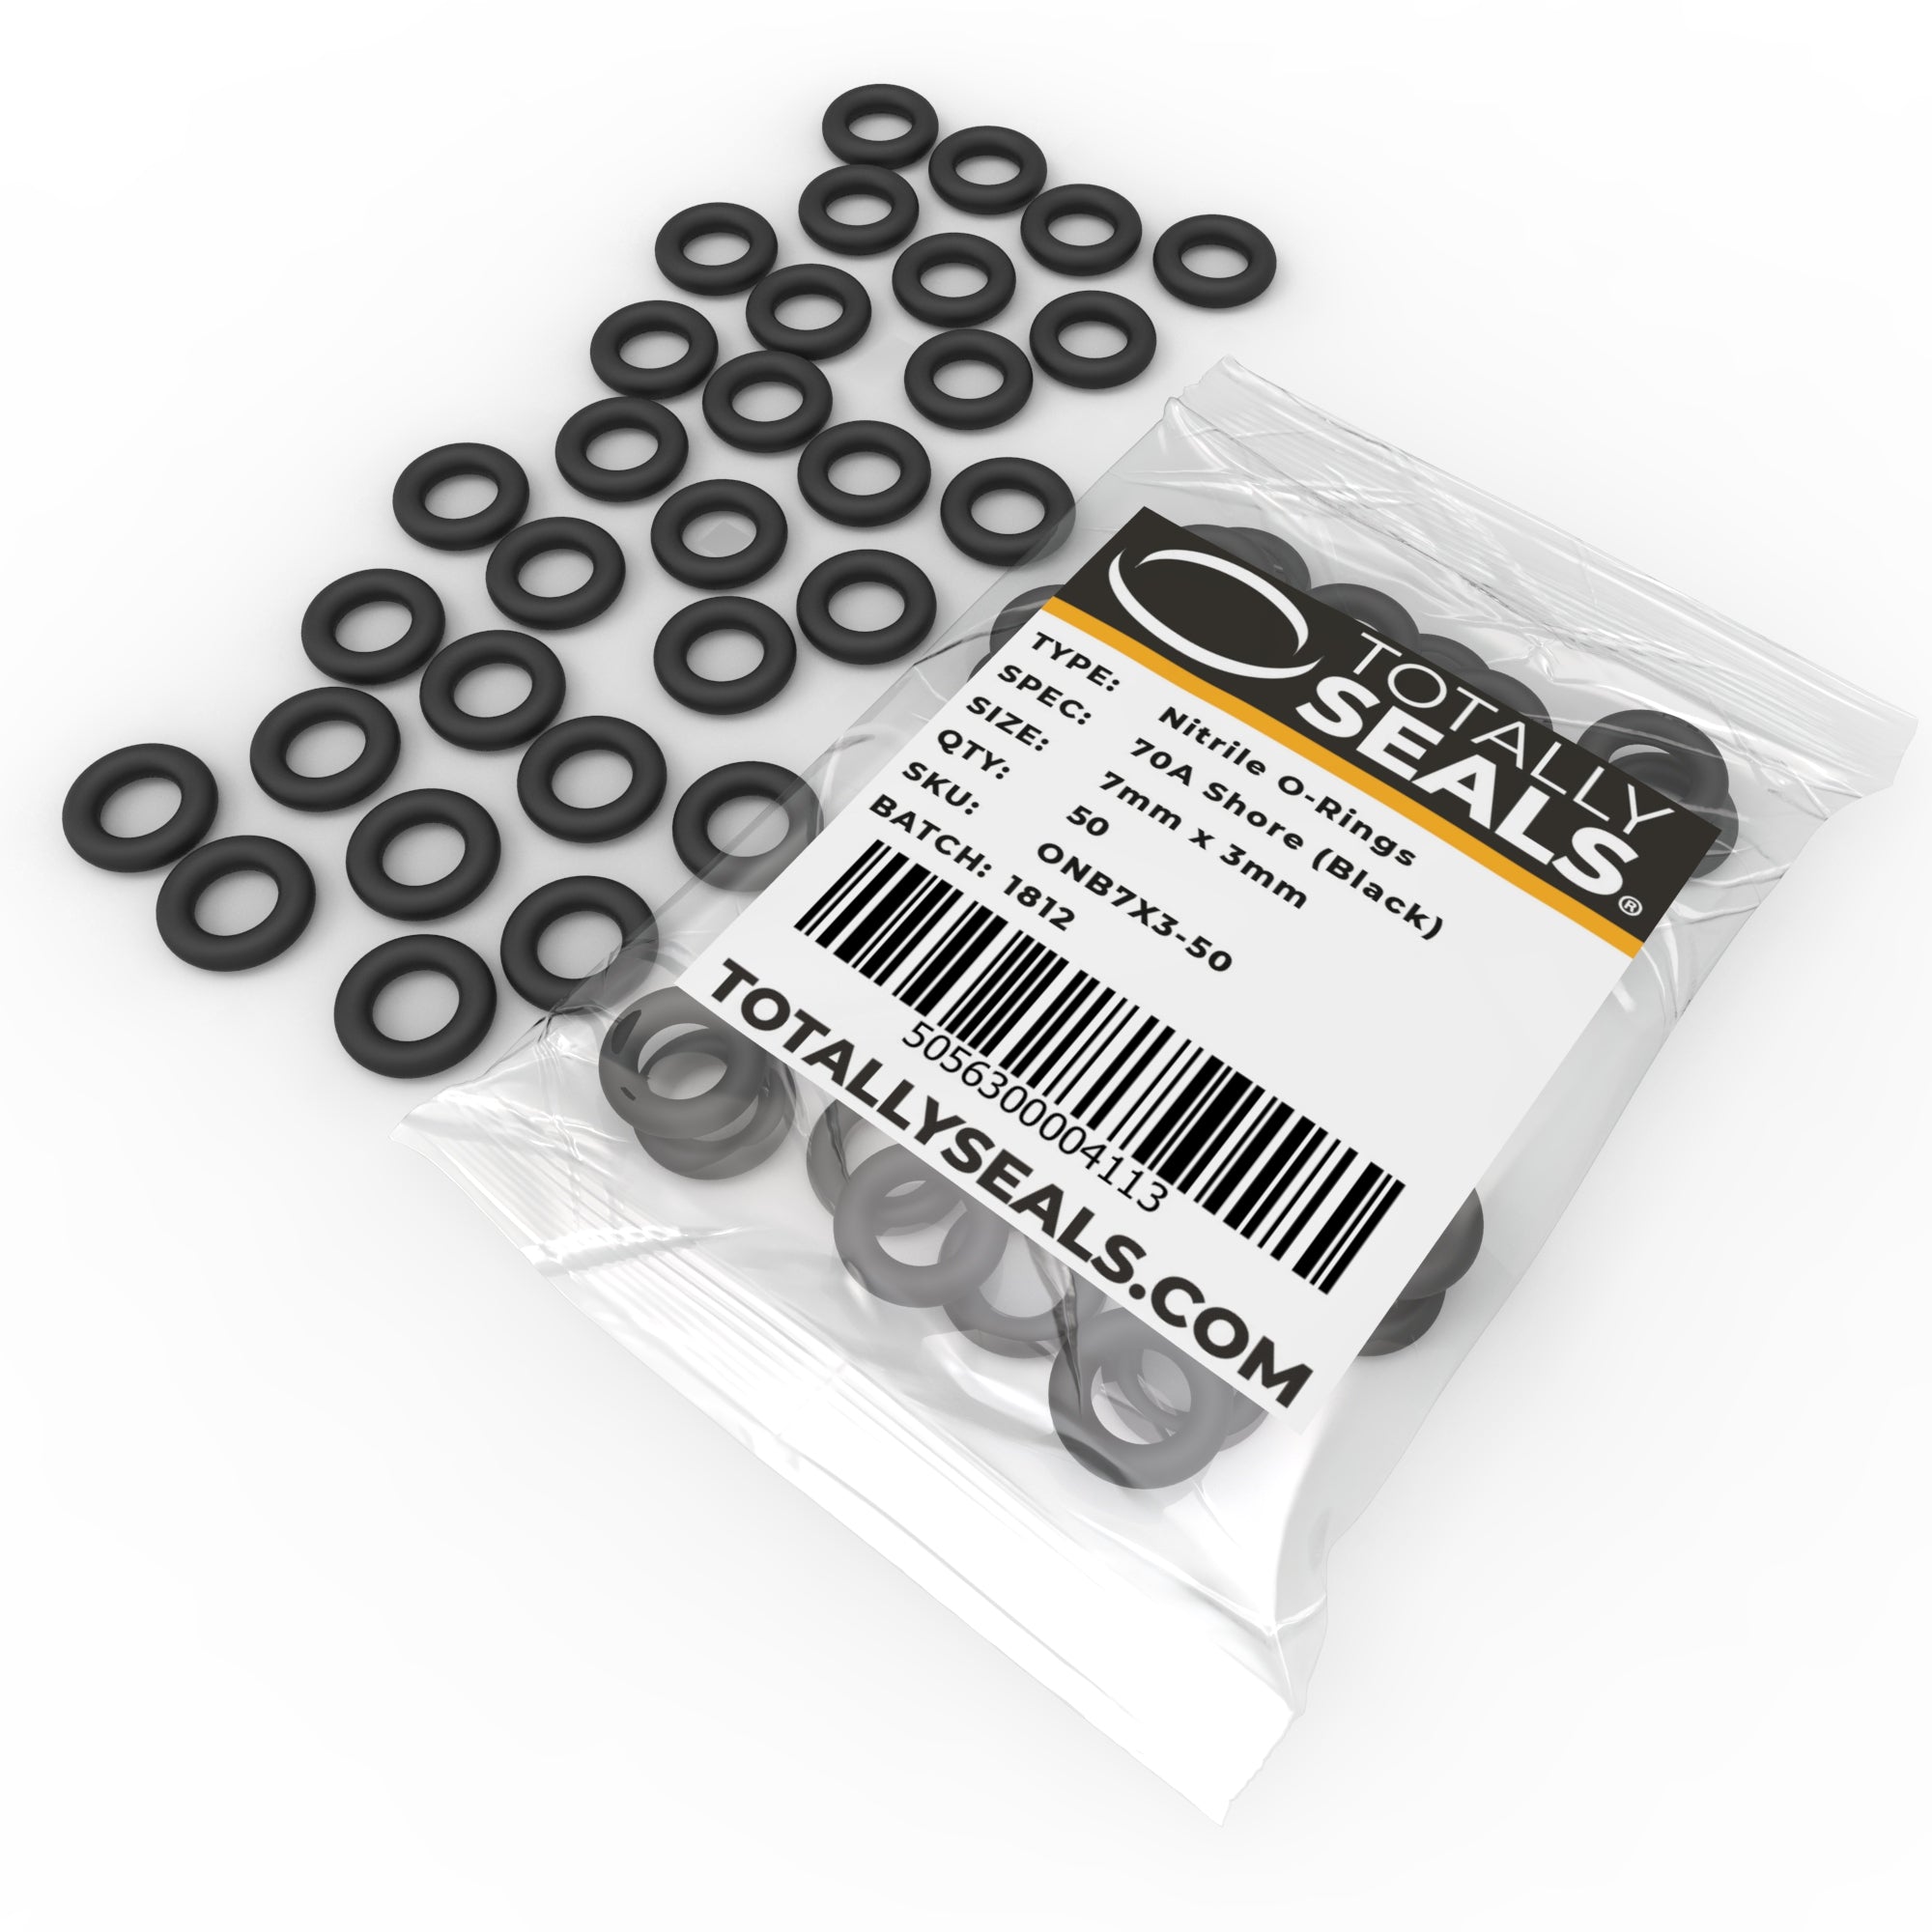 O RING METRIC 12.5MM INSIDE DIAMETER X 2MM THICK PACKET OF 6 